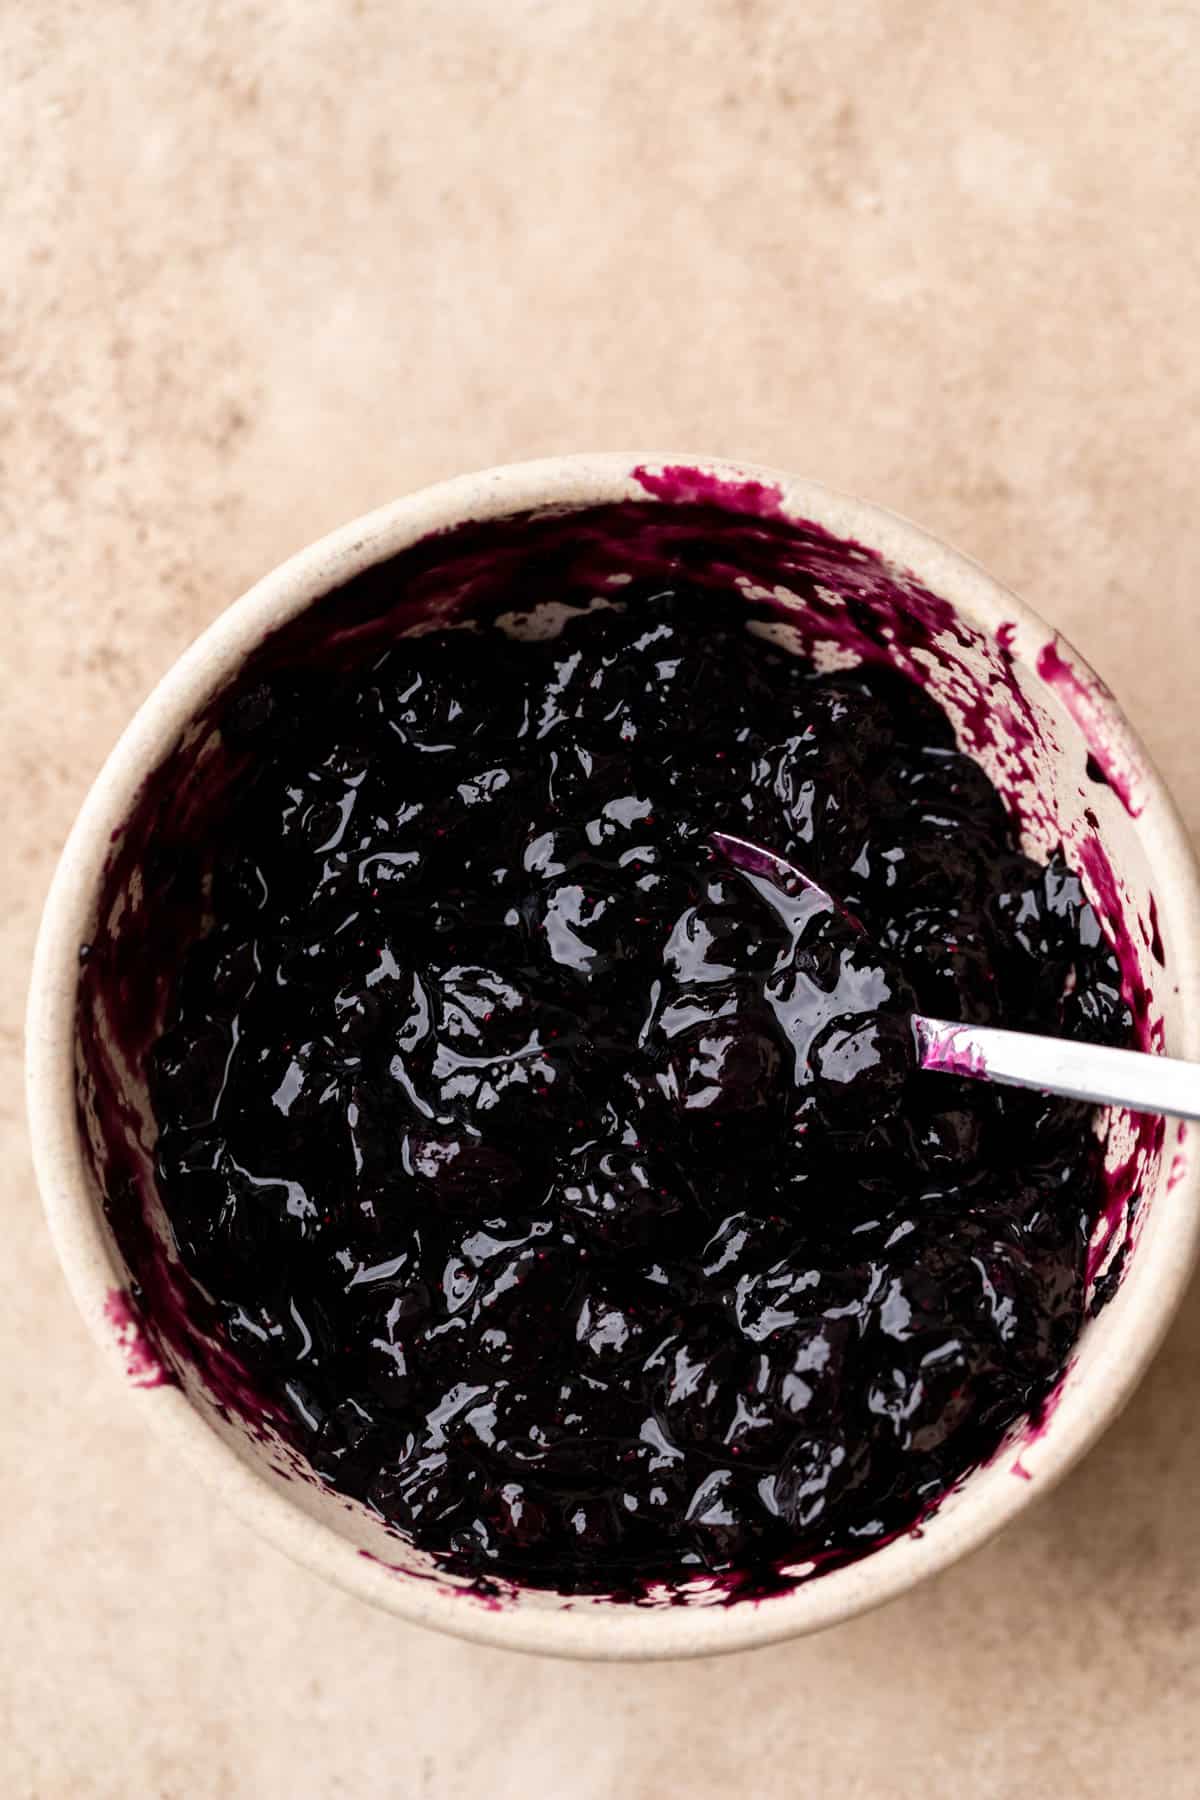 Blueberry jam in a bowl.